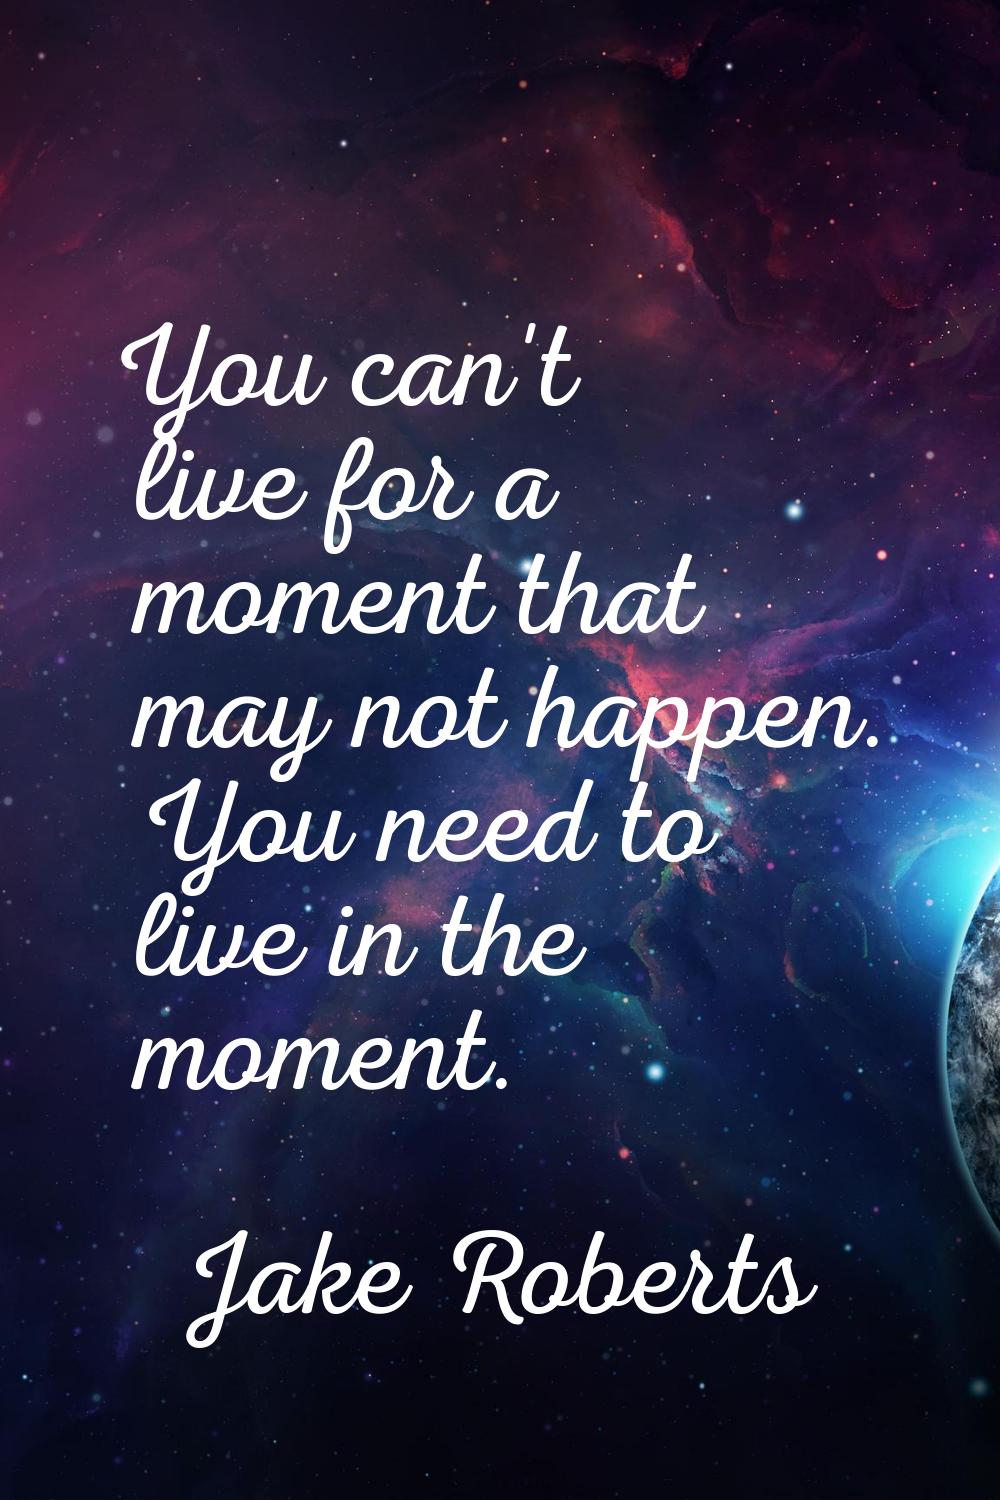 You can't live for a moment that may not happen. You need to live in the moment.